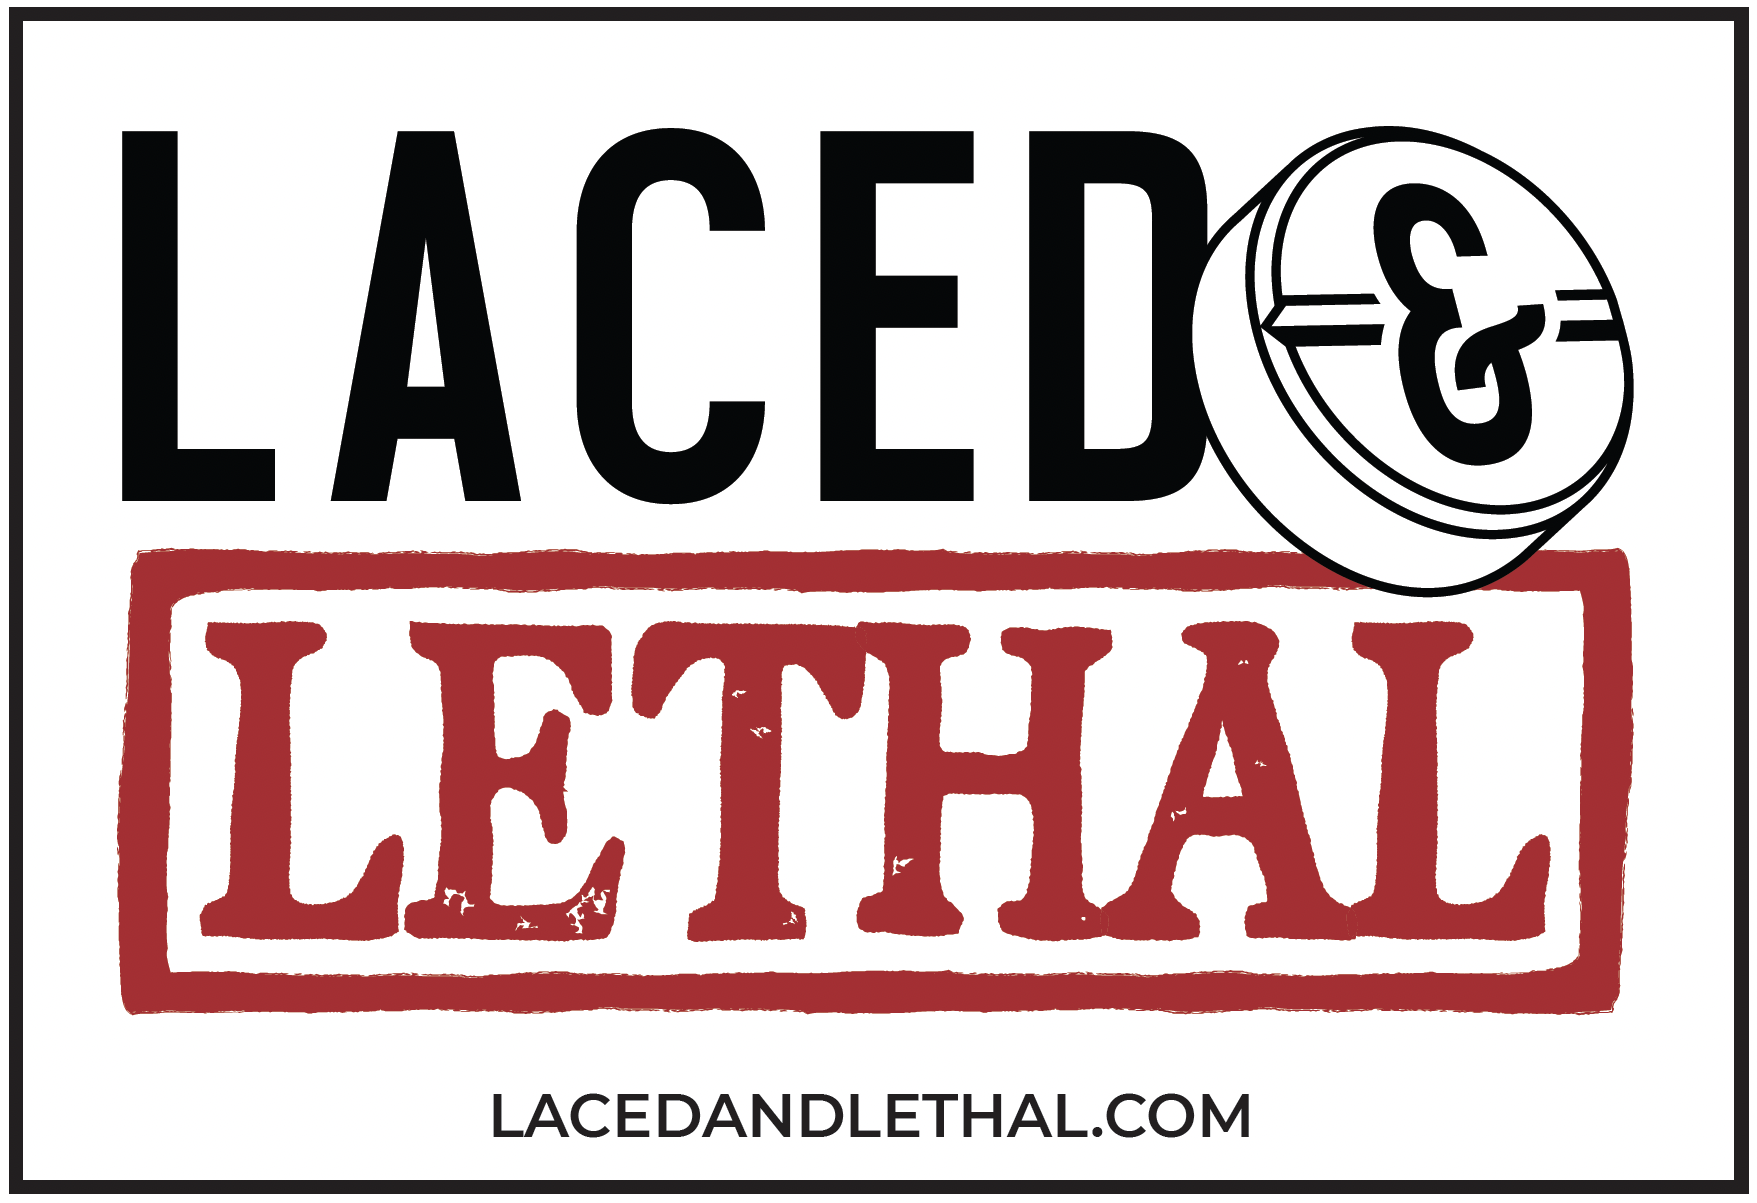 Laced and Lethal site external site logo